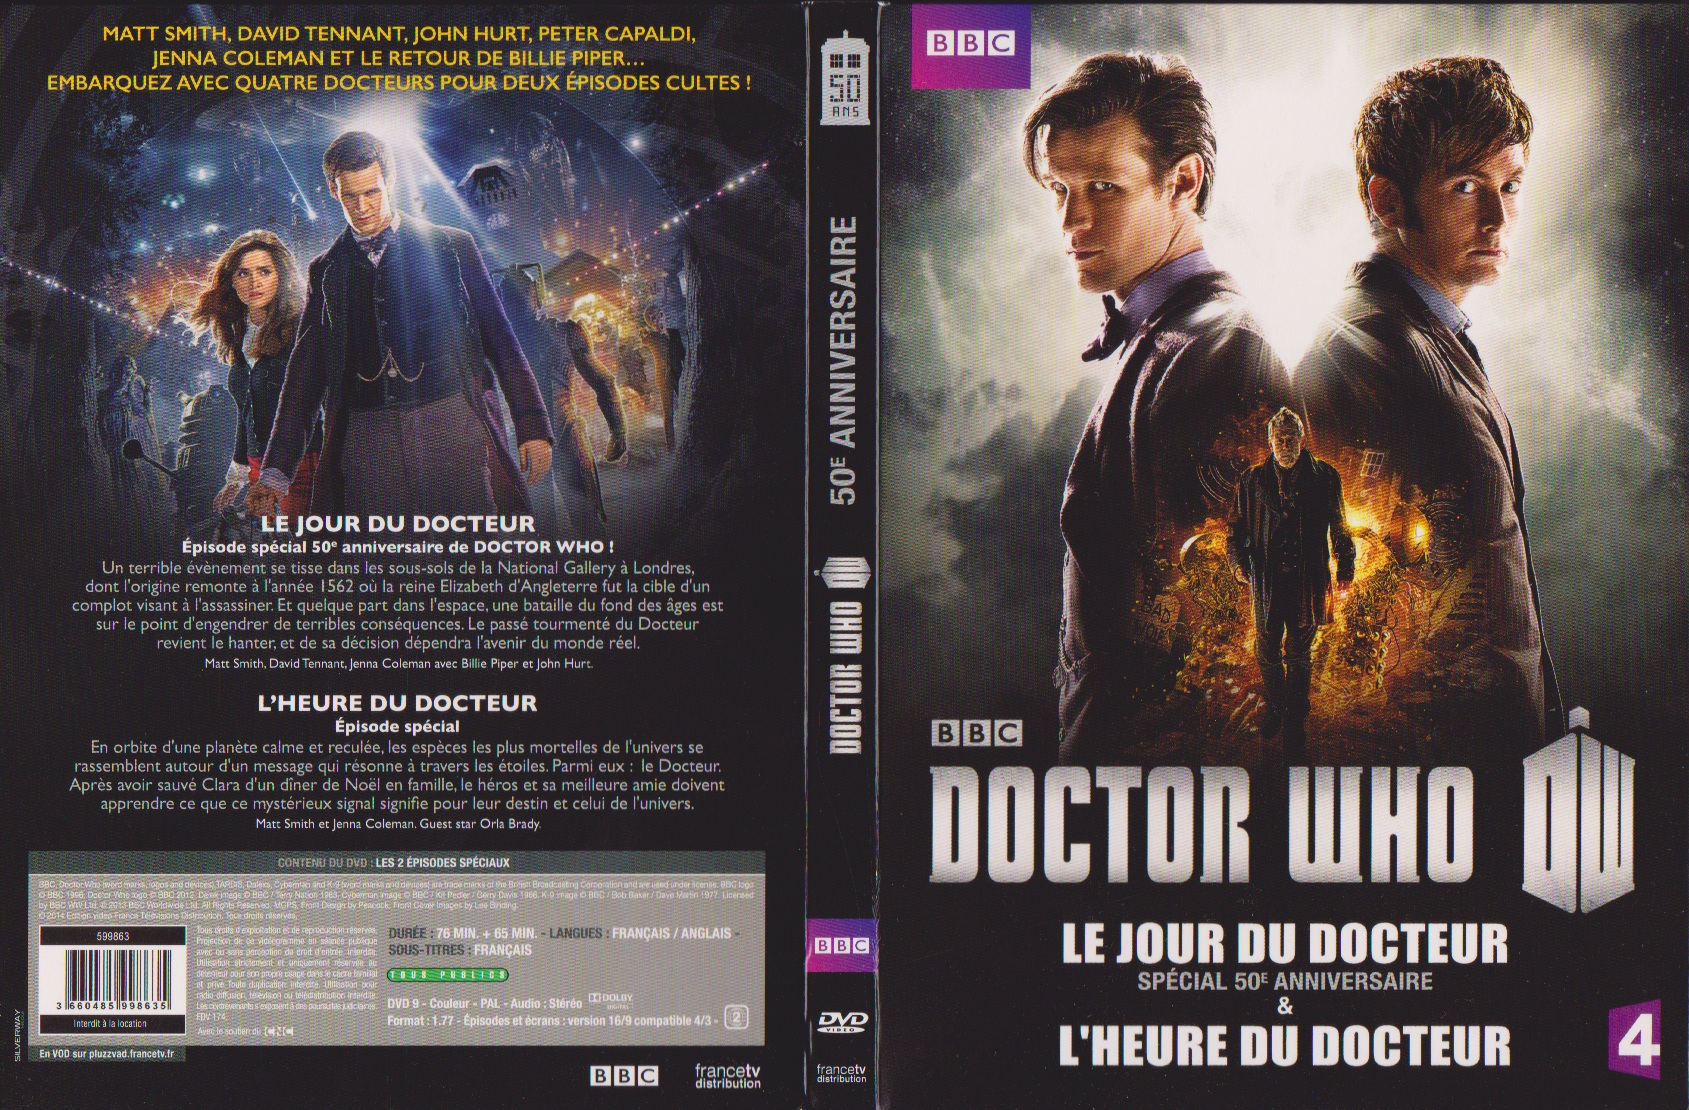 Jaquette DVD Doctor Who 50me anniverssaire